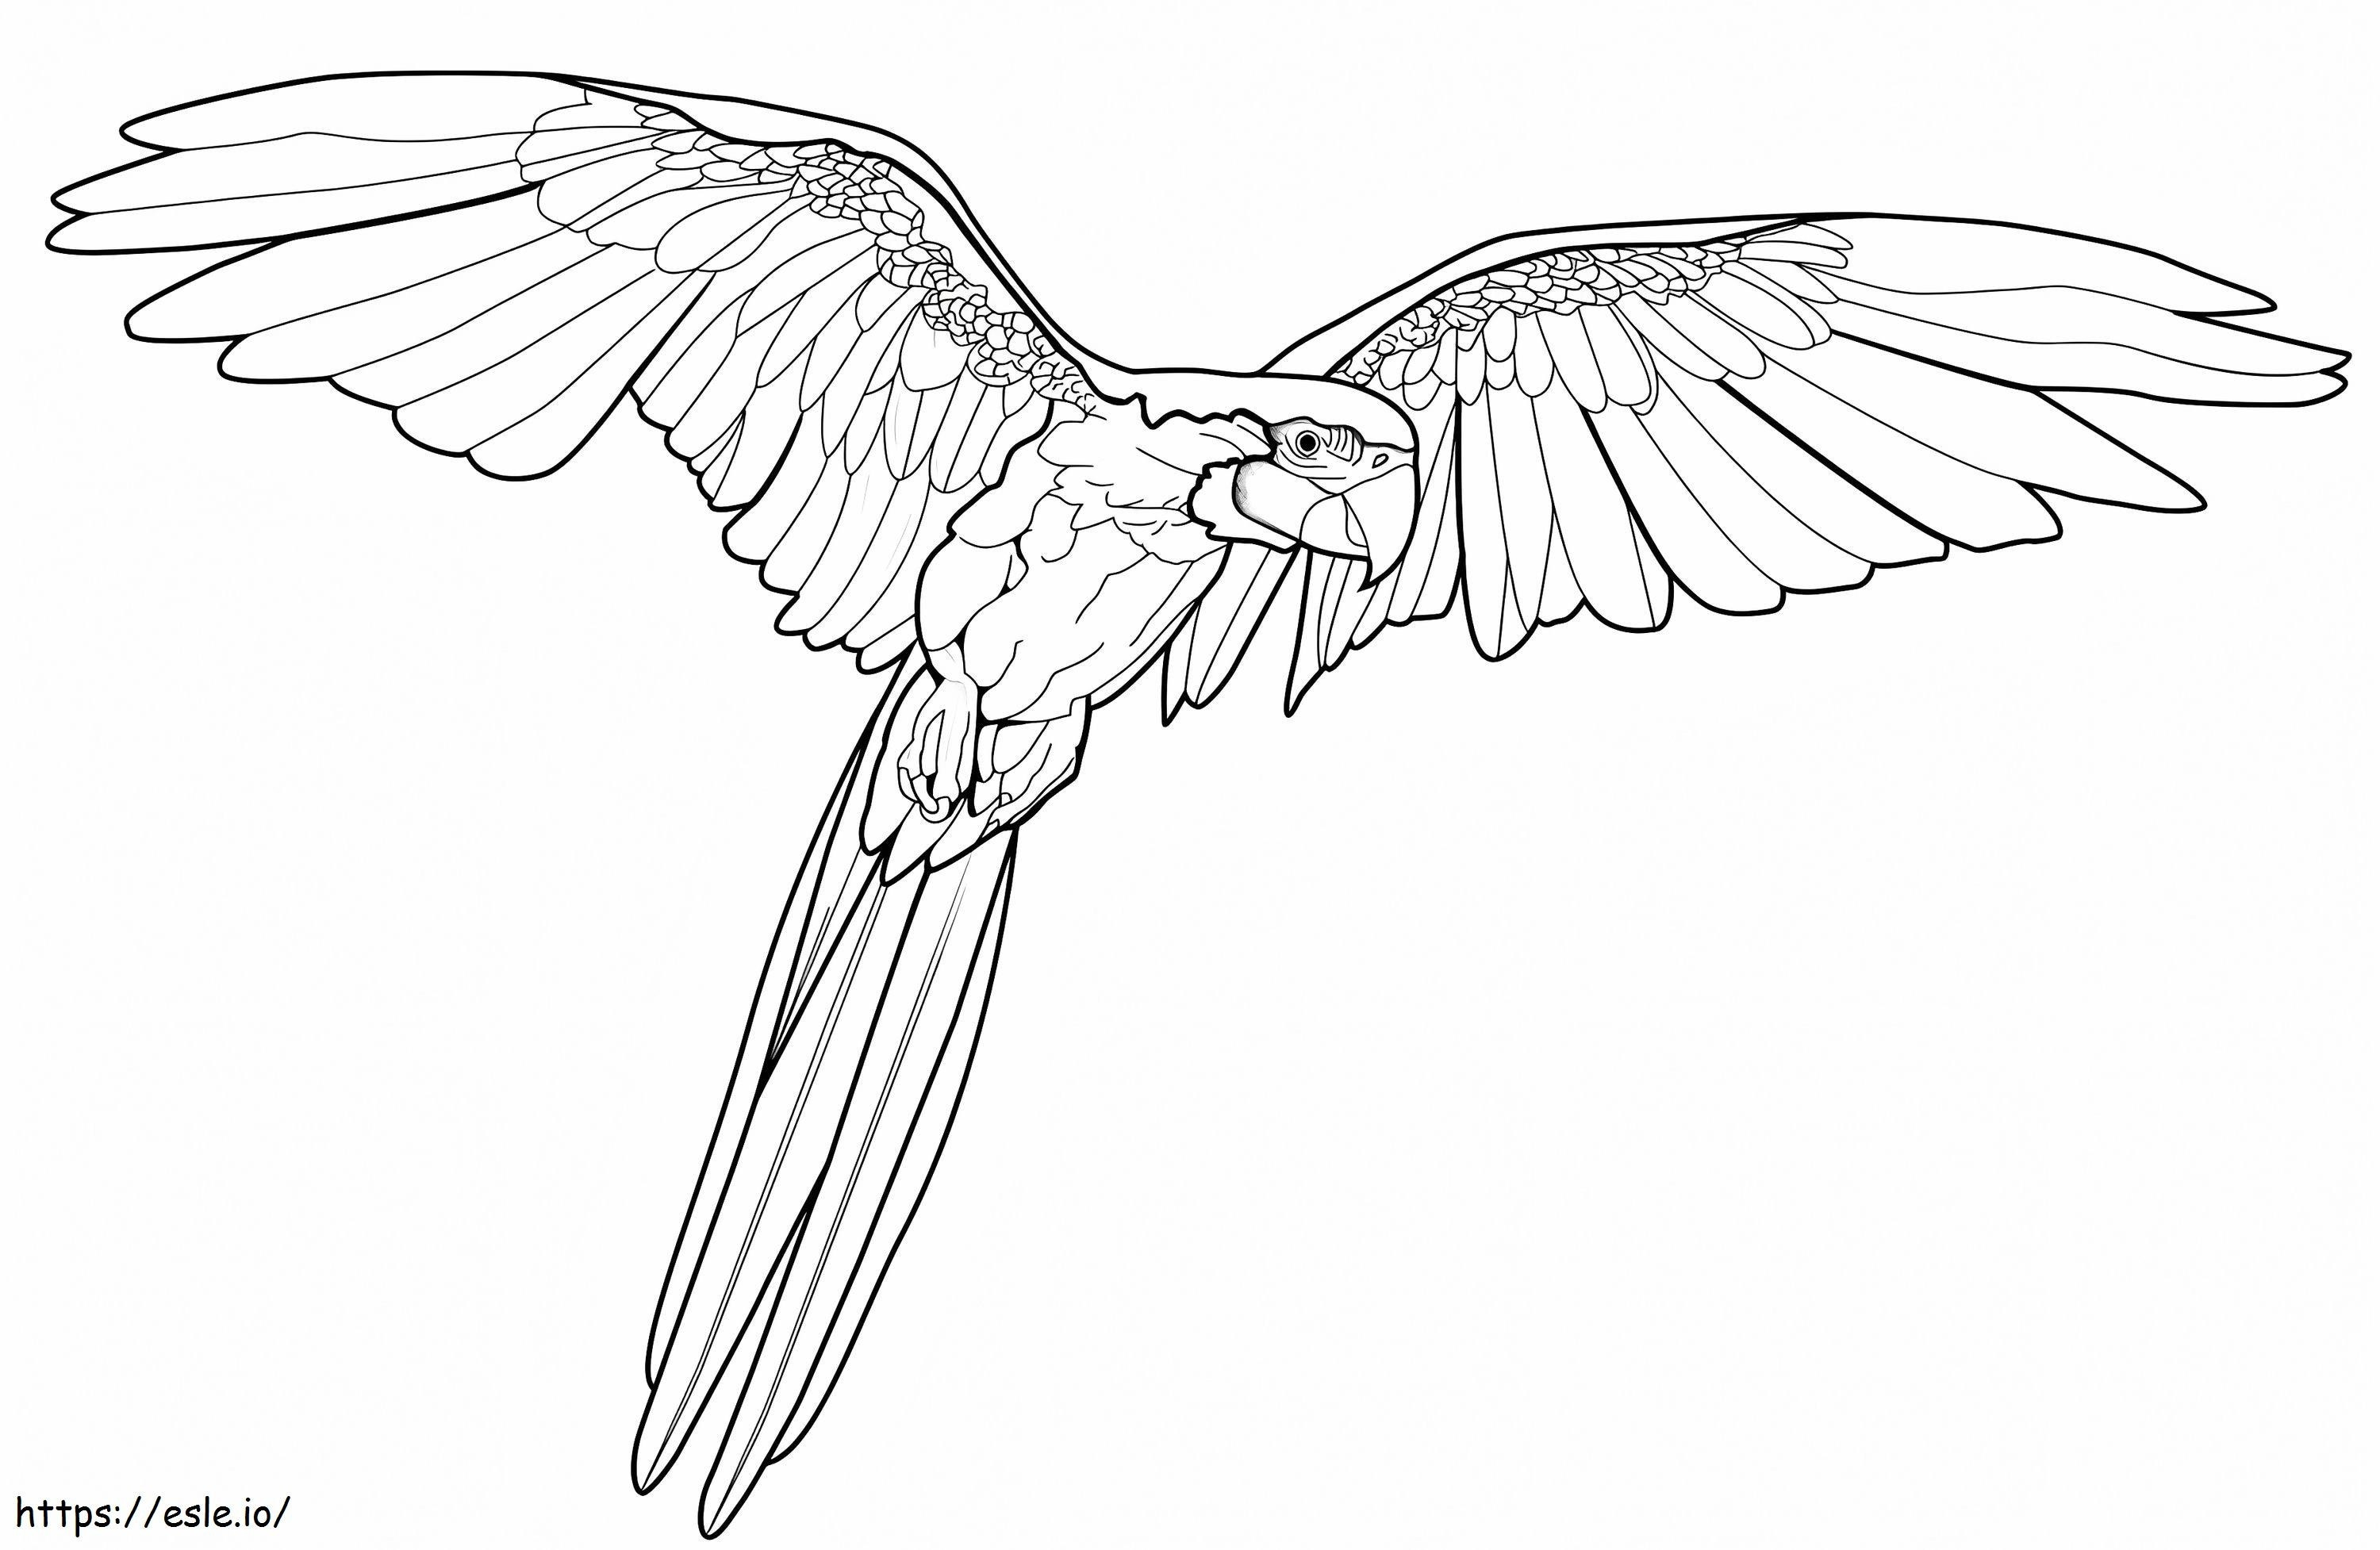 1560328865 Macaw Flying A4 coloring page